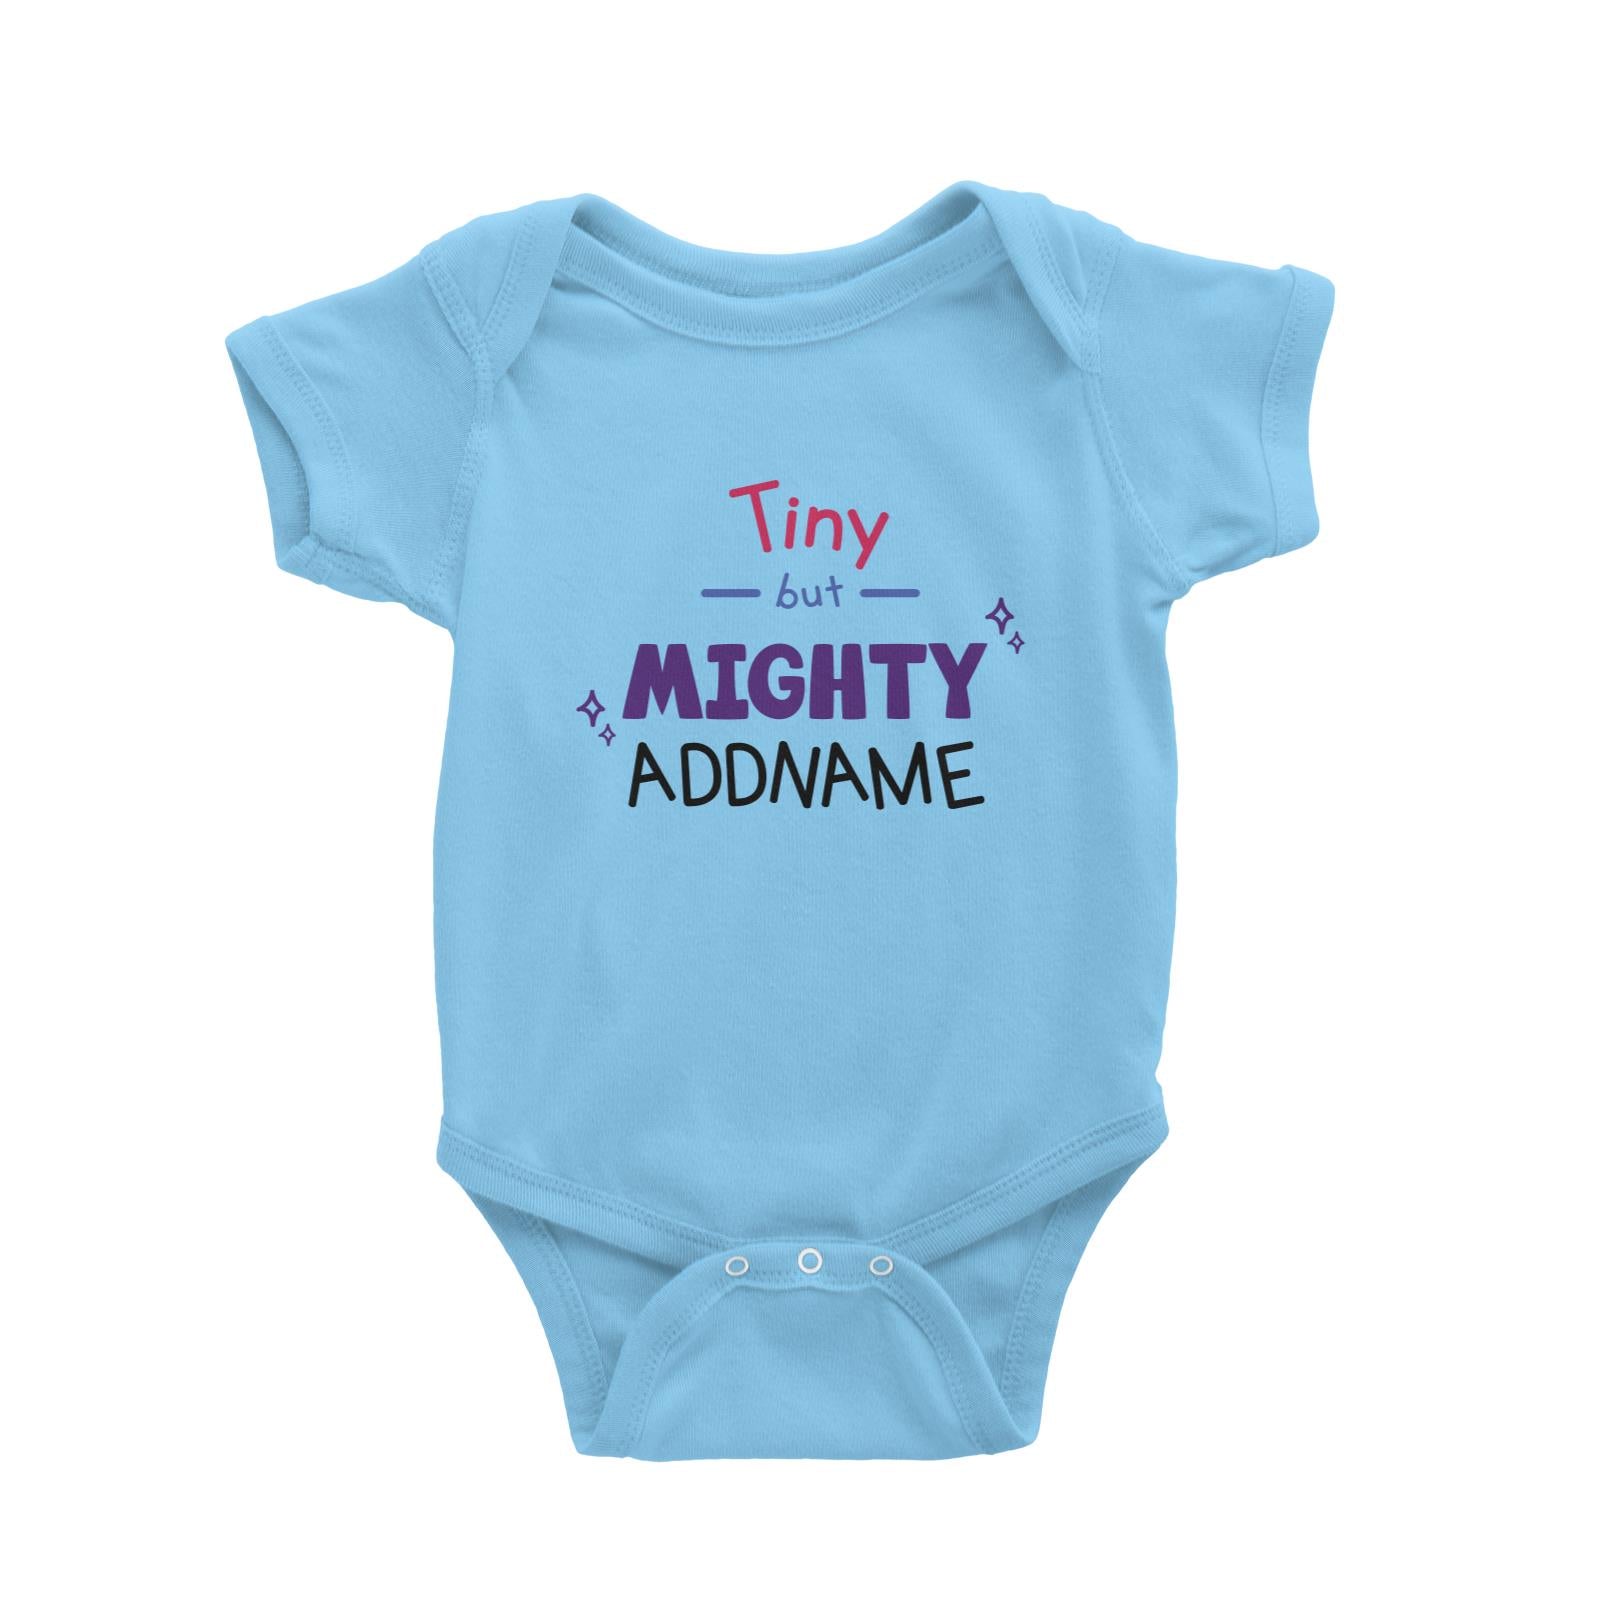 Children's Day Gift Series Tiny But Mighty Addname Baby Romper